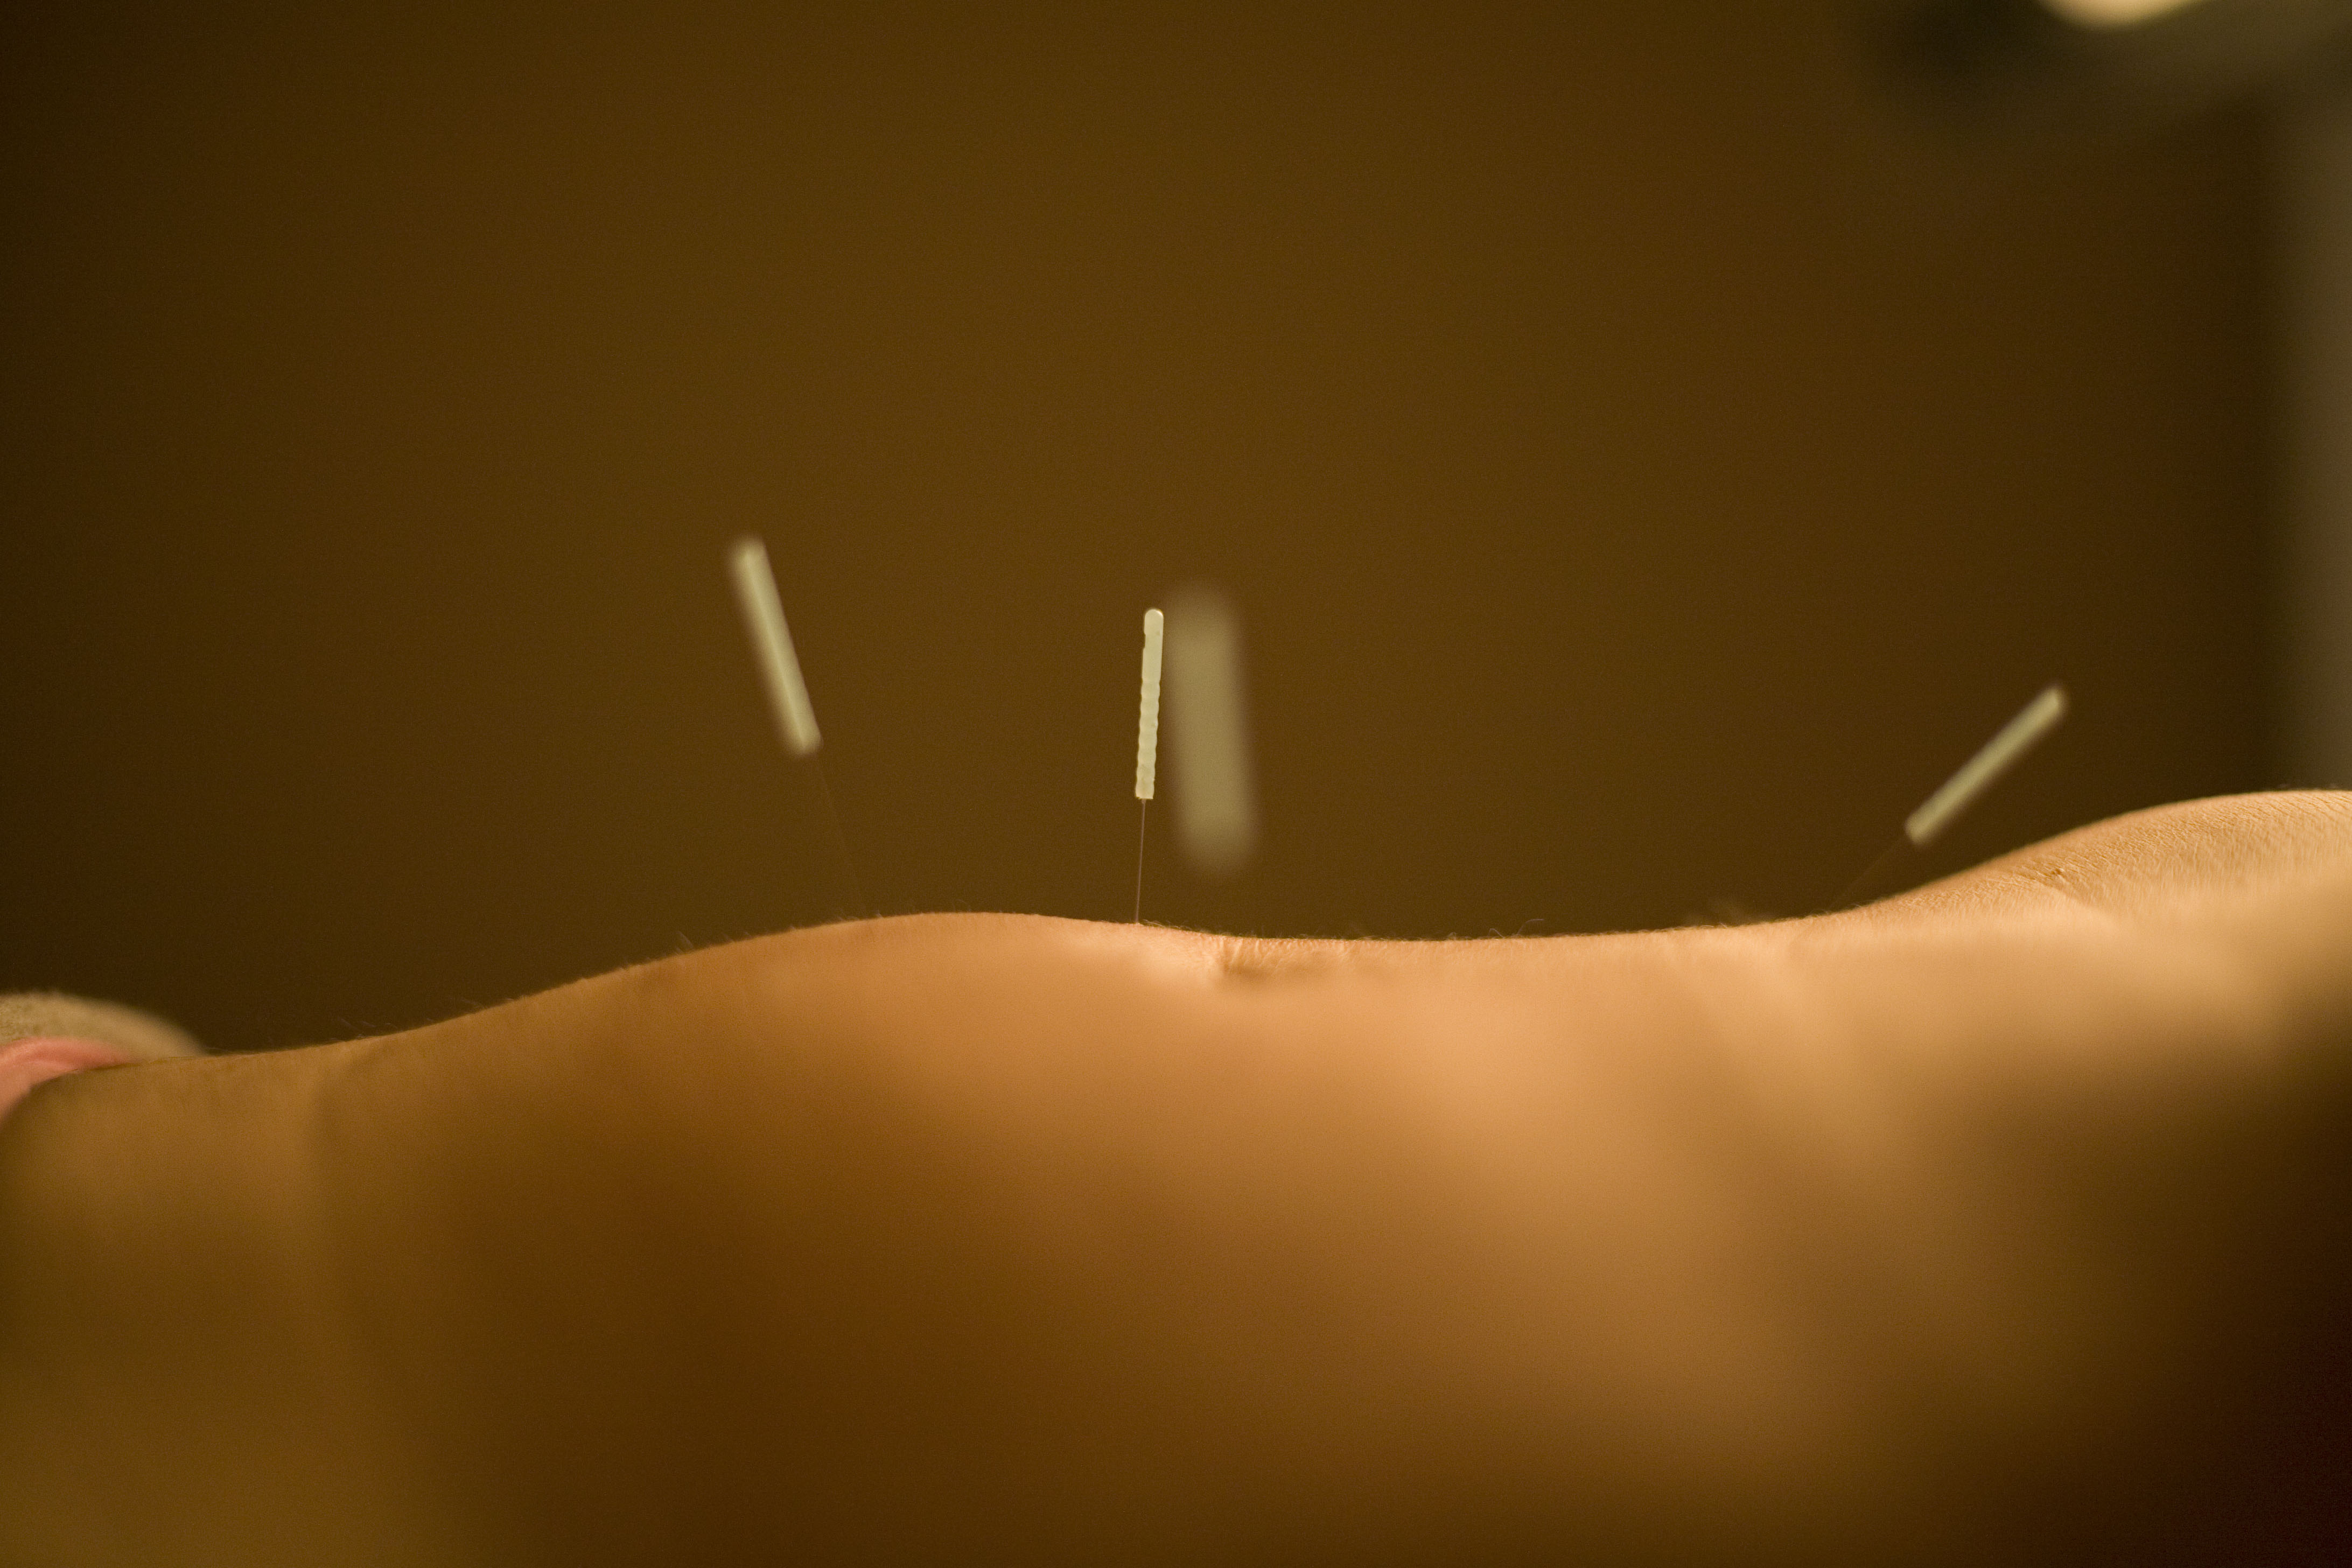 A client receives acupuncture in the abdomen with hair-thin needles.